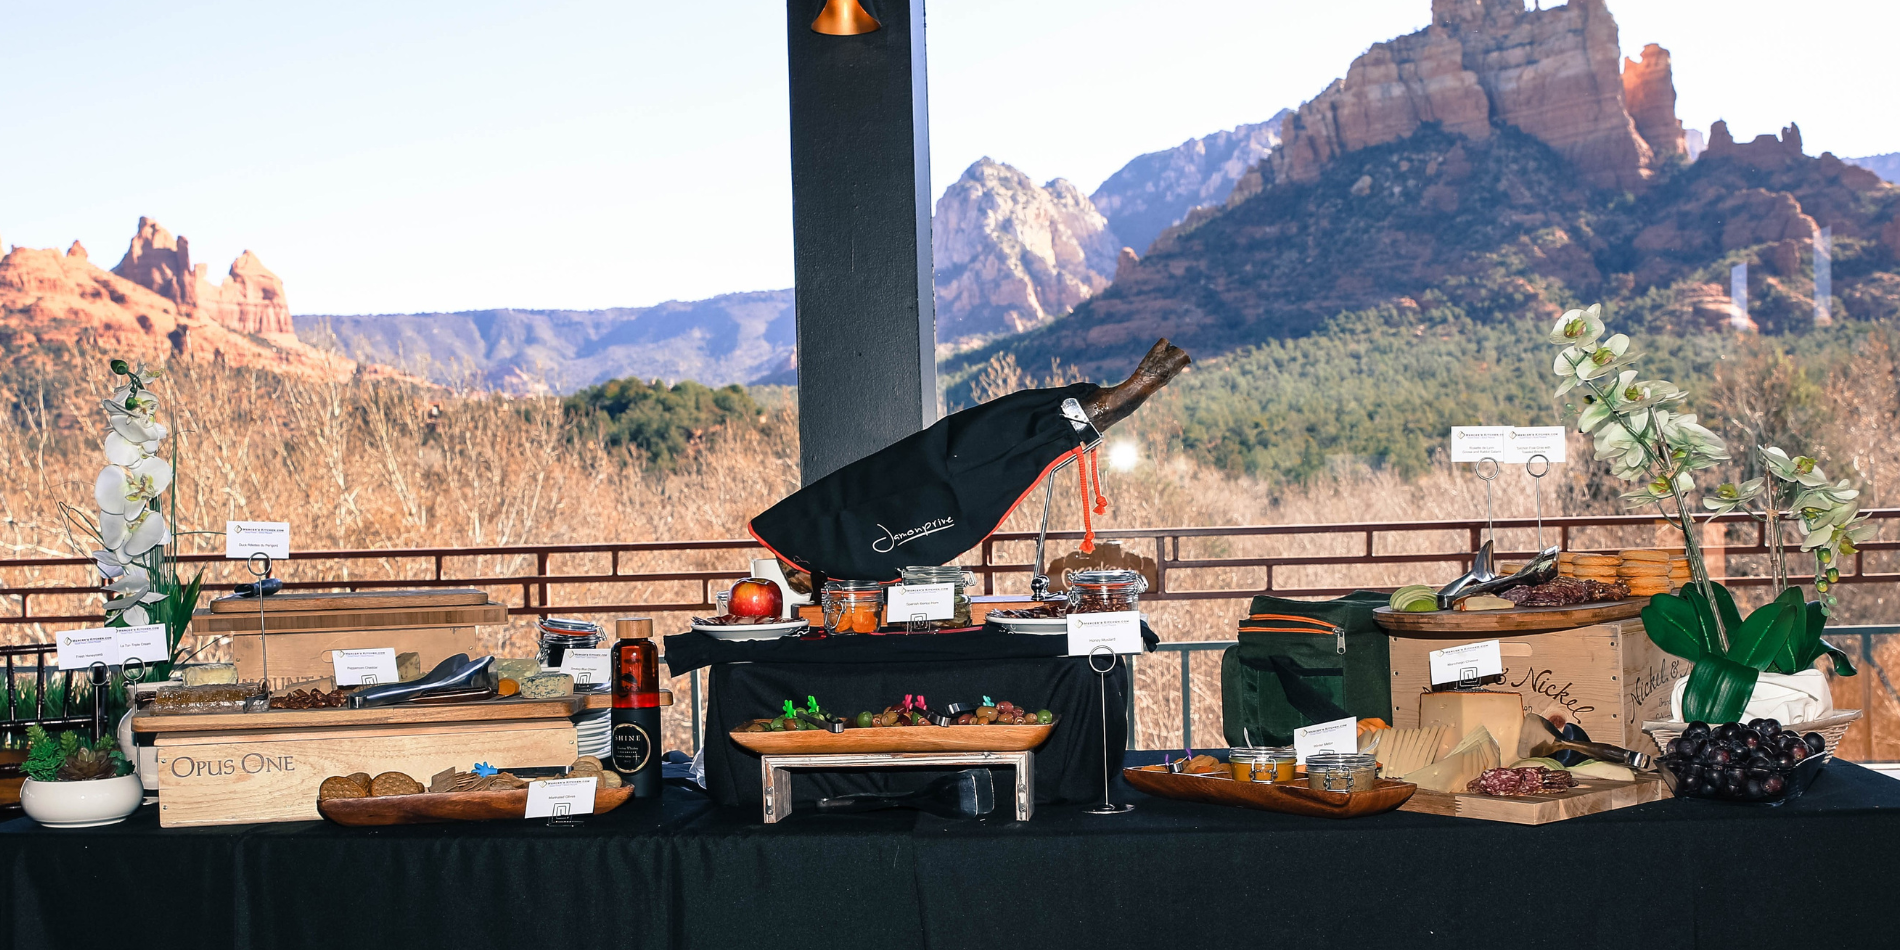 This image showcases a gourmet catering spread on a buffet table at an indoor event at the view at creekside with the majestic red rocks of Sedona in the background. The table is adorned with a variety of cheeses, charcuterie, and fruits, elegantly presented in wooden crates and on rustic boards. A notable feature is a large bottle of Opus One wine in a bespoke cradle with a black cloth, indicating a high-end dining experience. The setup is complemented by green floral arrangements and placards describing the wine selections, all under the open sky, inviting guests to enjoy a luxurious culinary experience in a stunning natural setting.